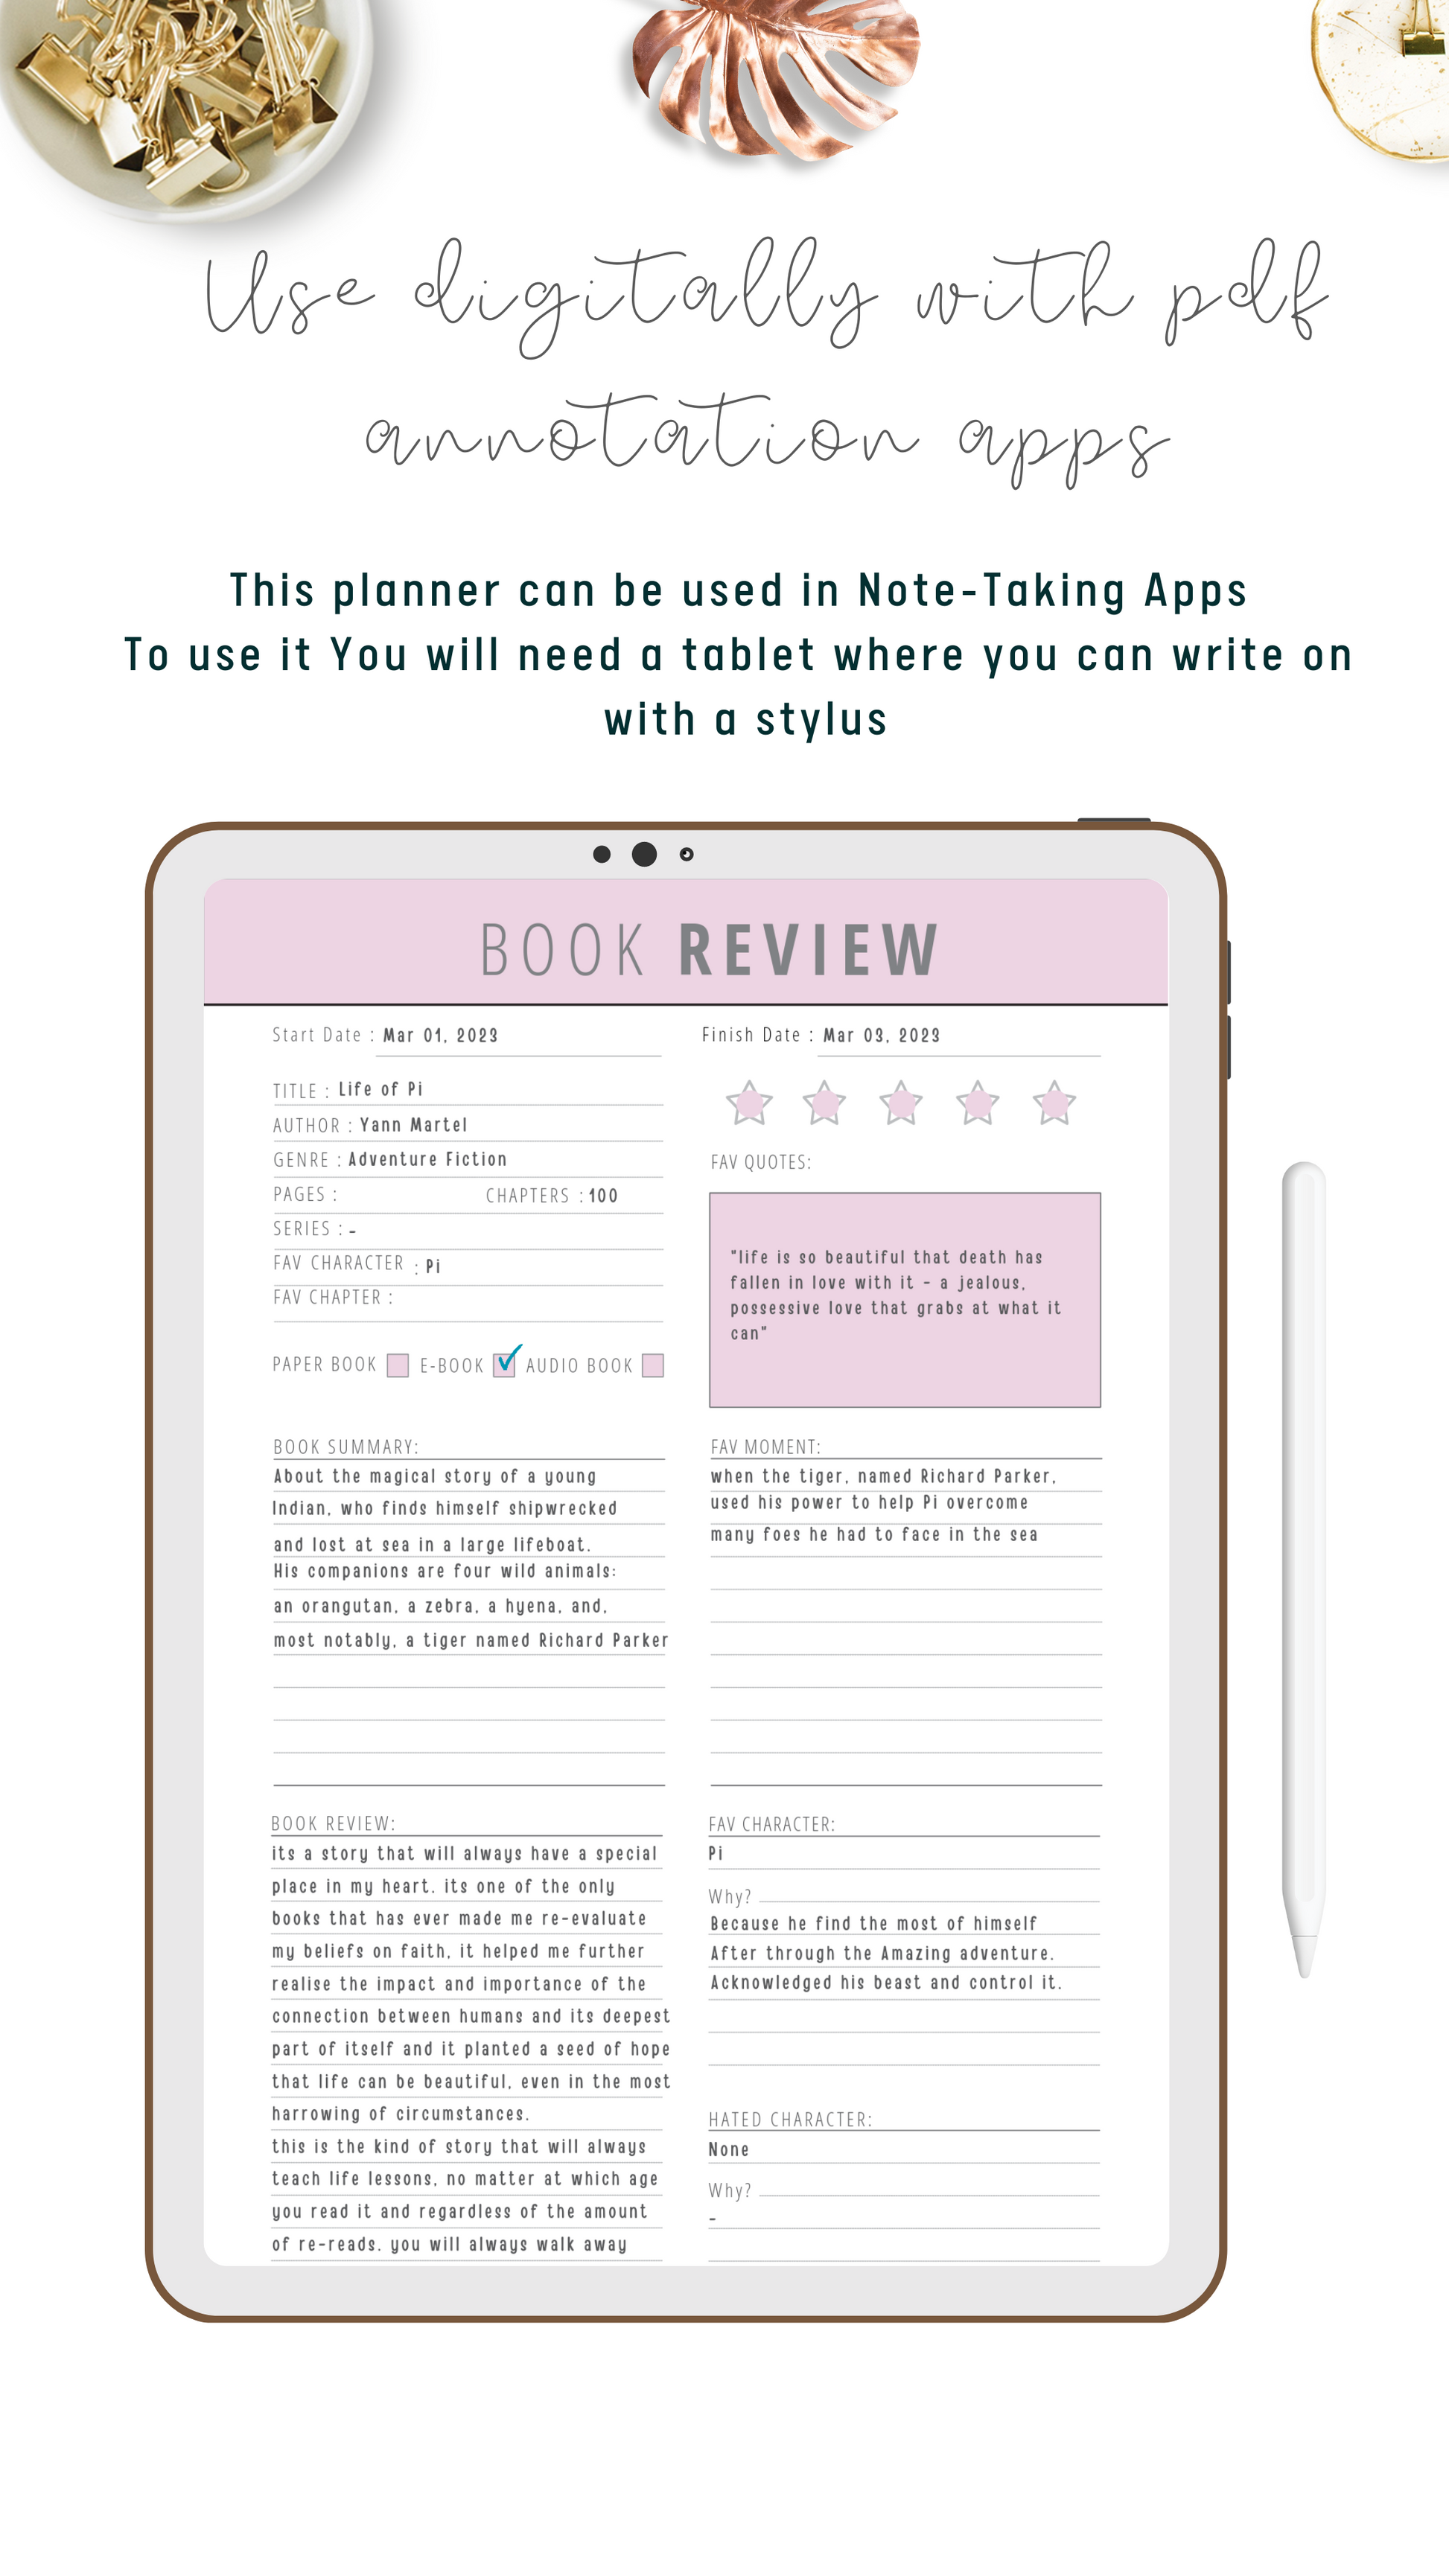 Cute Purple Book Review Planner use digitally with PDF Annotation Apps